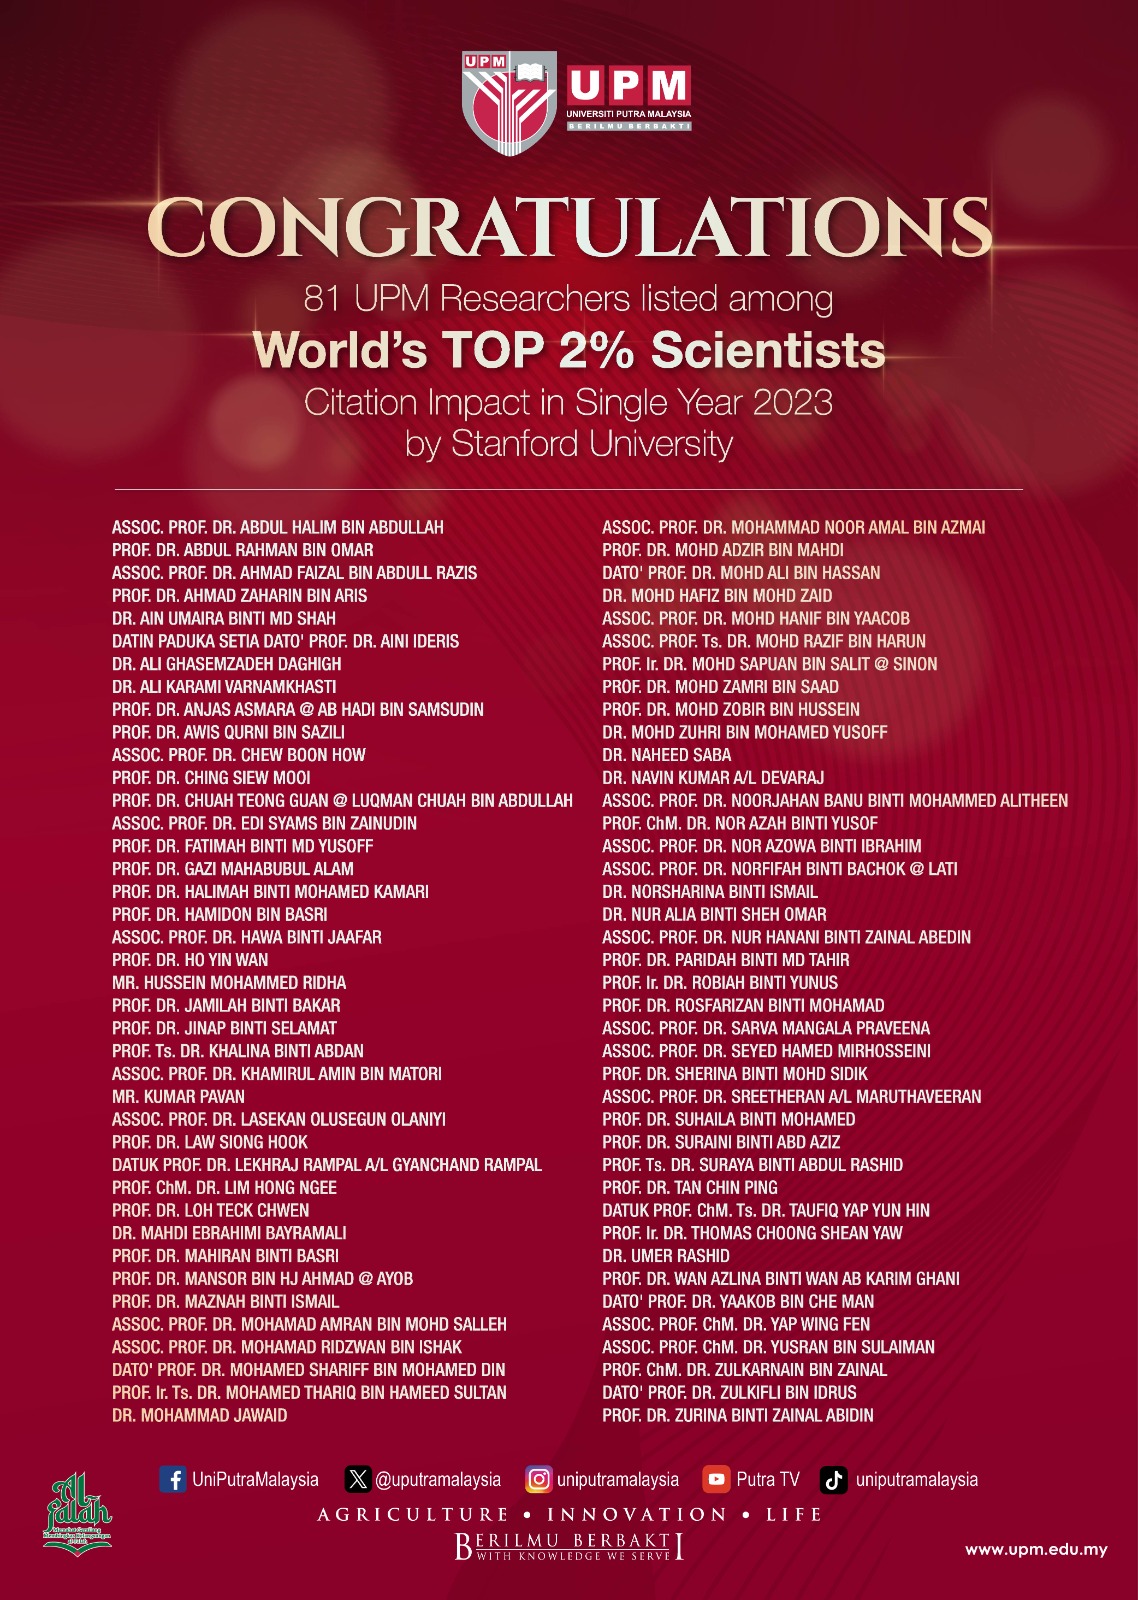 Congratulations to 81 UPM researchers who have been listed among the world's top 2% scientists for their citation impact in the single year 2023 by Stanford University.